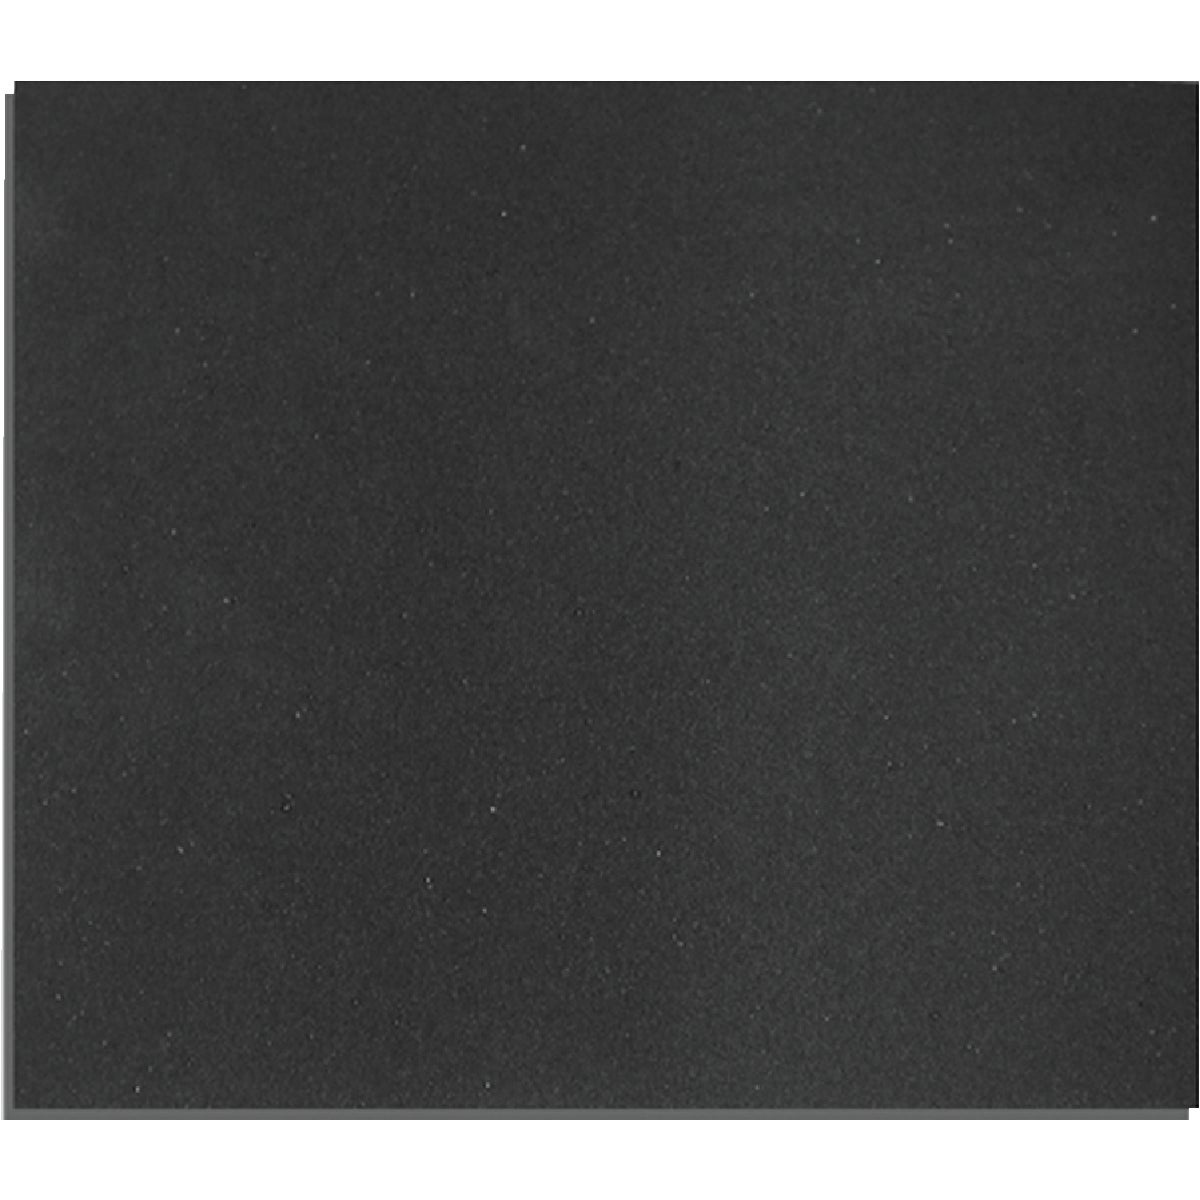 Item 411192, 1/4" thick sponge rubber gasket material for use with saddle tees or other 